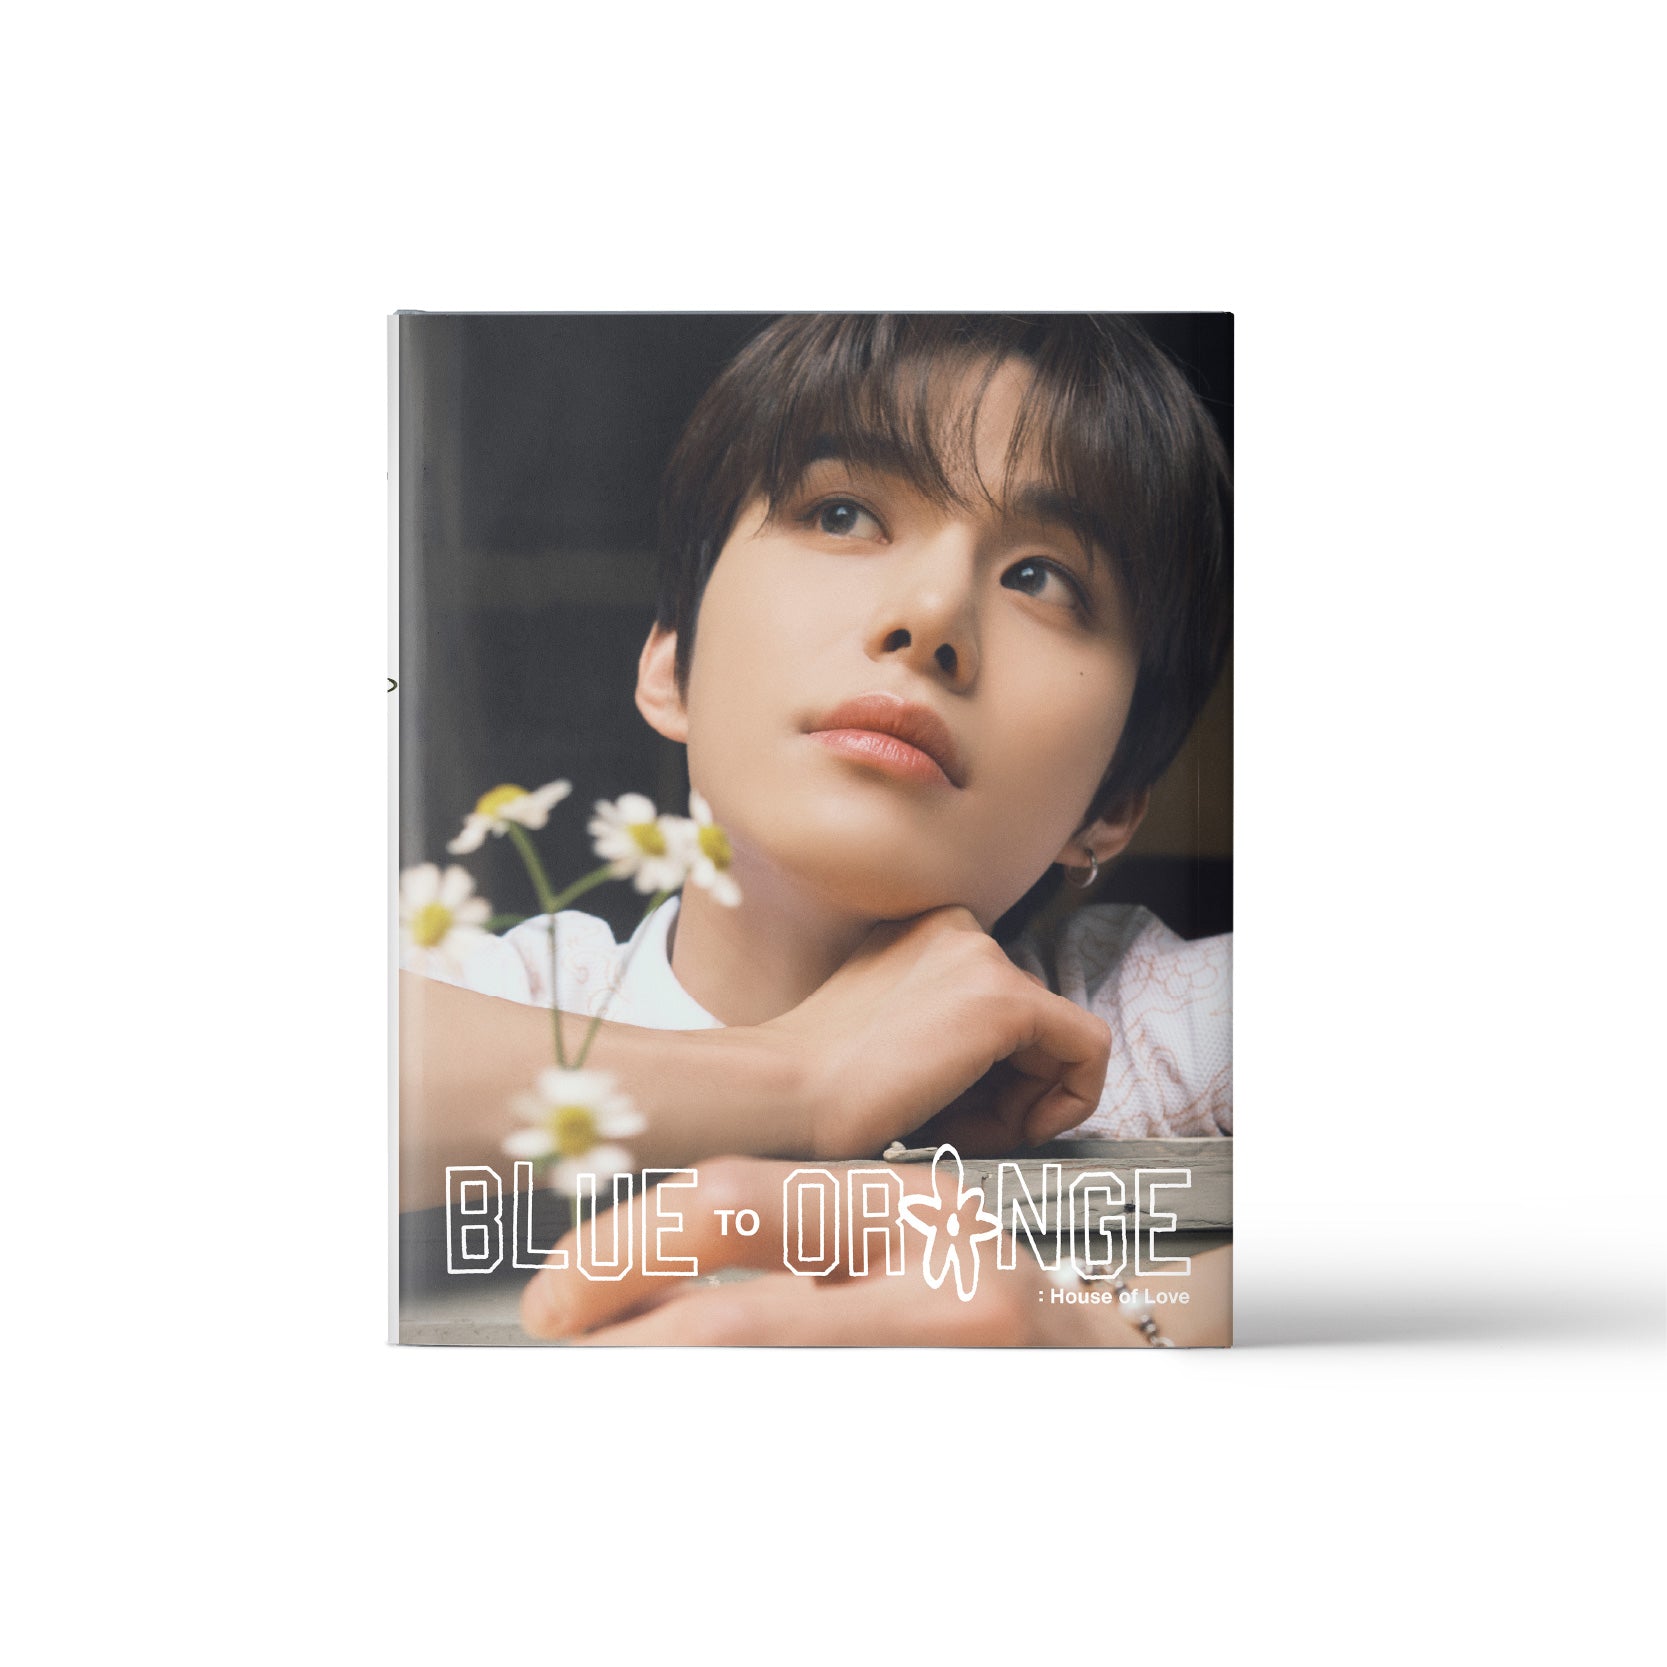 NCT 127 JUNGWOO - BLUE TO ORANGE : House of Love (PHOTOBOOK)